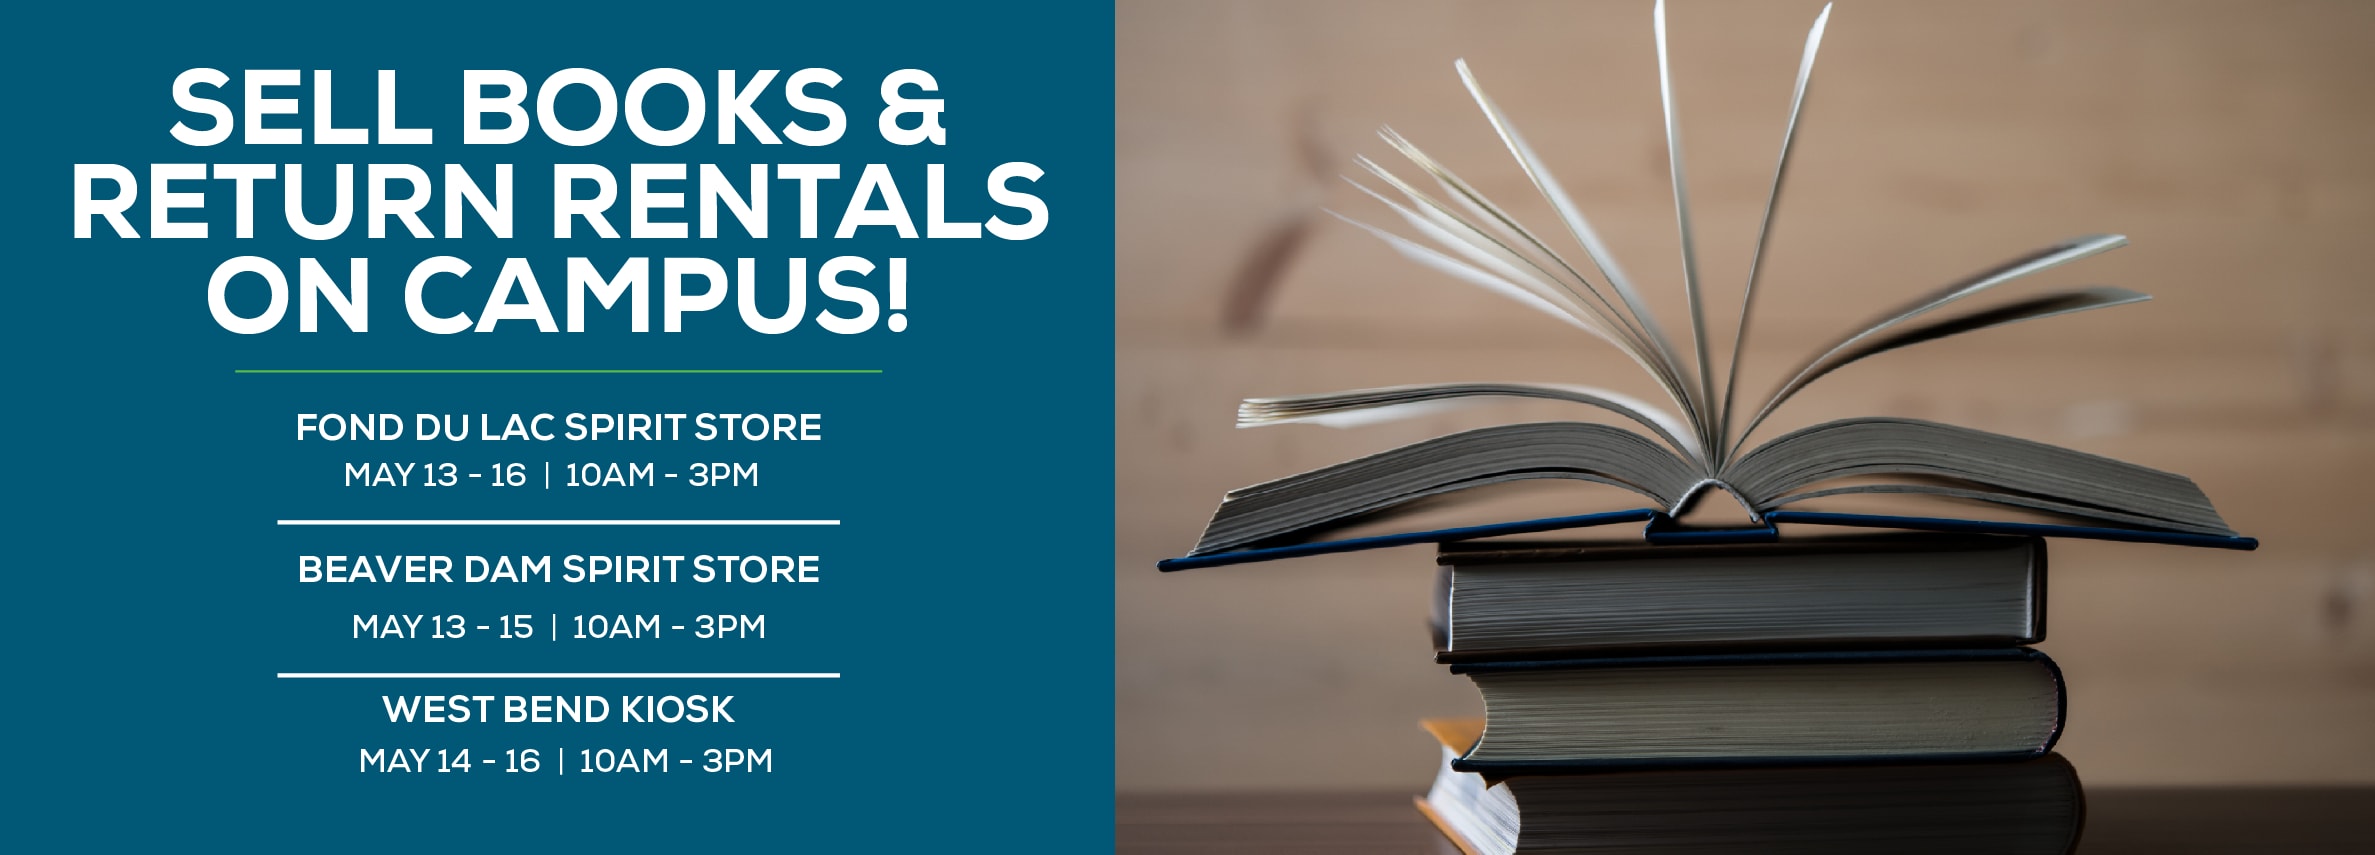 Sell Books & Return Rentals On Campus!  May 13 - 16; 10am-3pm; Fond du Lac Spirit Store. May 13 - 15; 10am-3pm; Beaver Dam Spirit Store. May 14 - 16; 10am-3pm; West Bend Kiosk